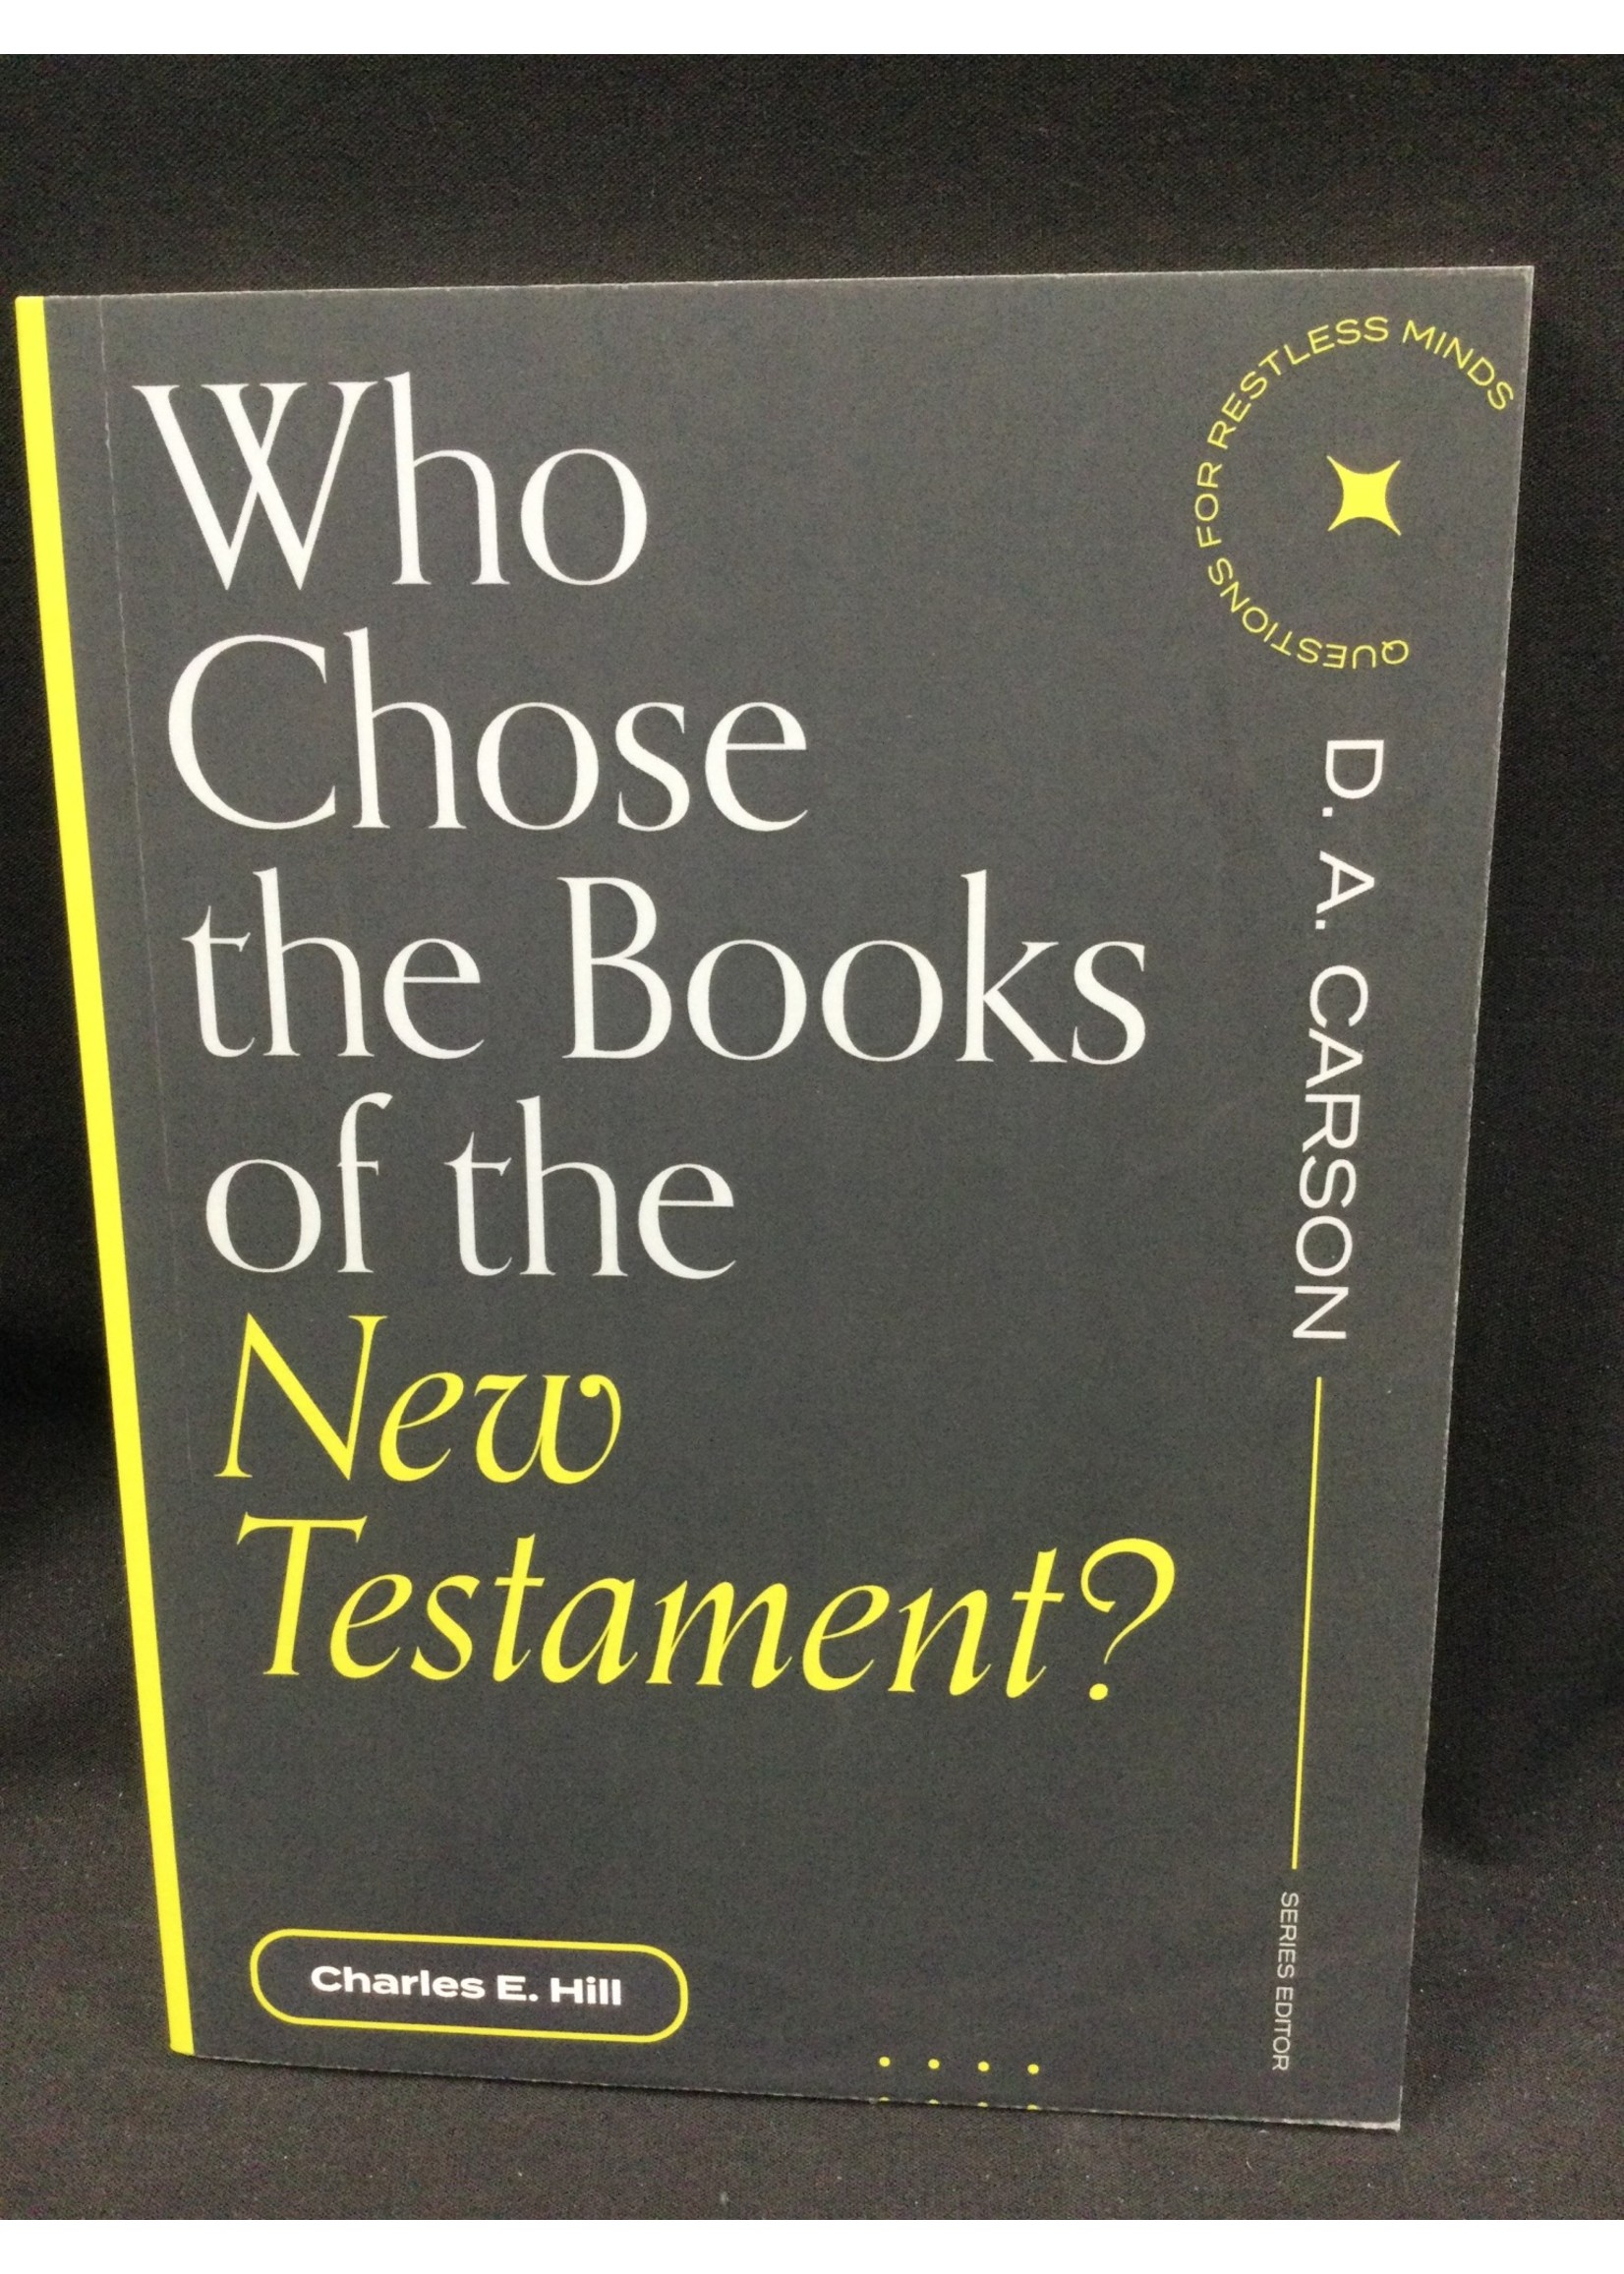 WHO CHOSE THE BOOKS OF THE NEW TEST